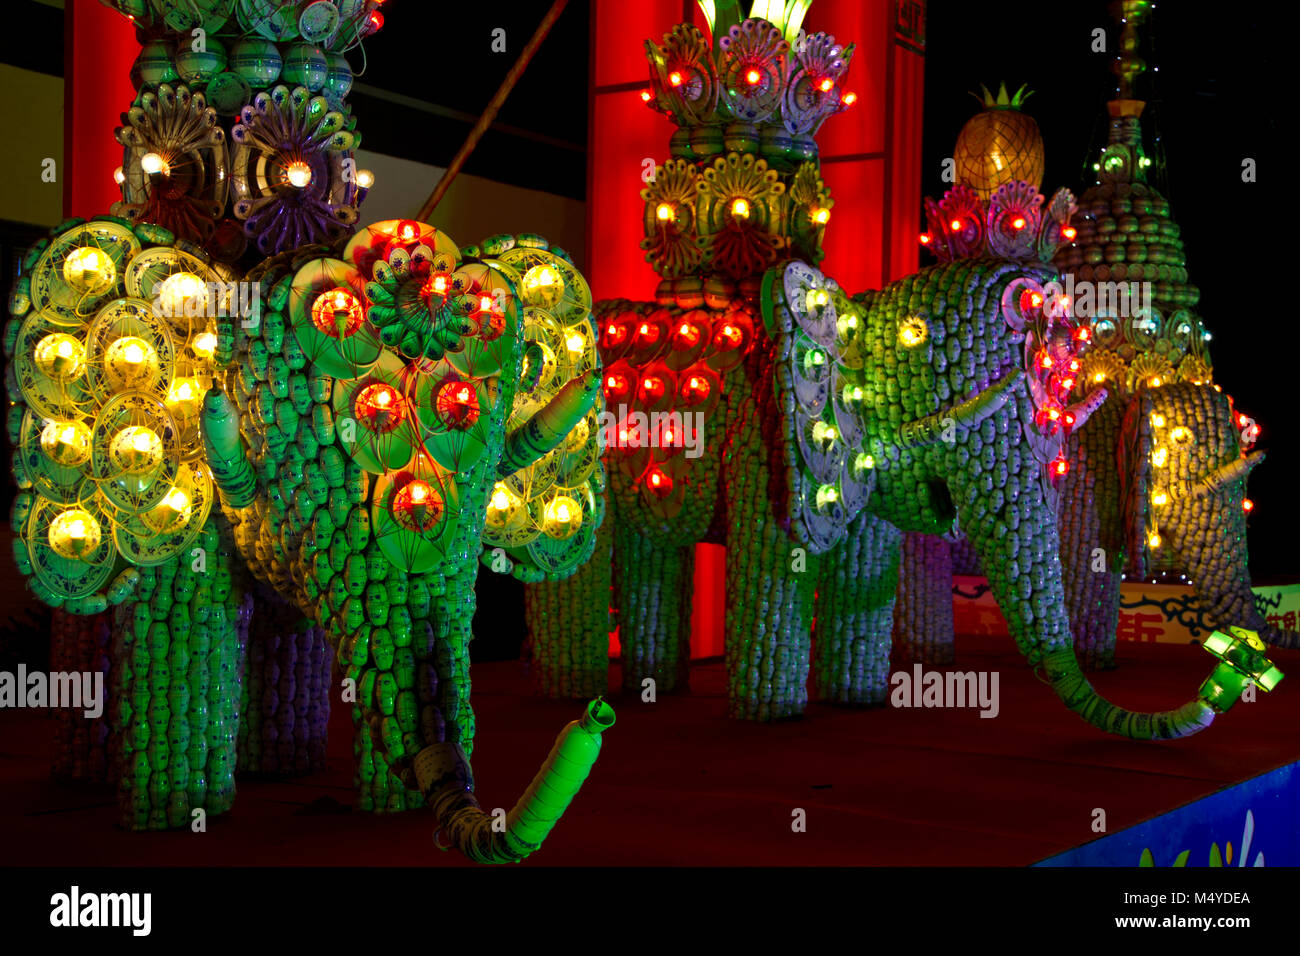 Haren, the Netherlands - November 22, 2011: Three elephants made of Chinese soup cups, decorated with colorful light, exposed at Chinese Lantern Light Stock Photo